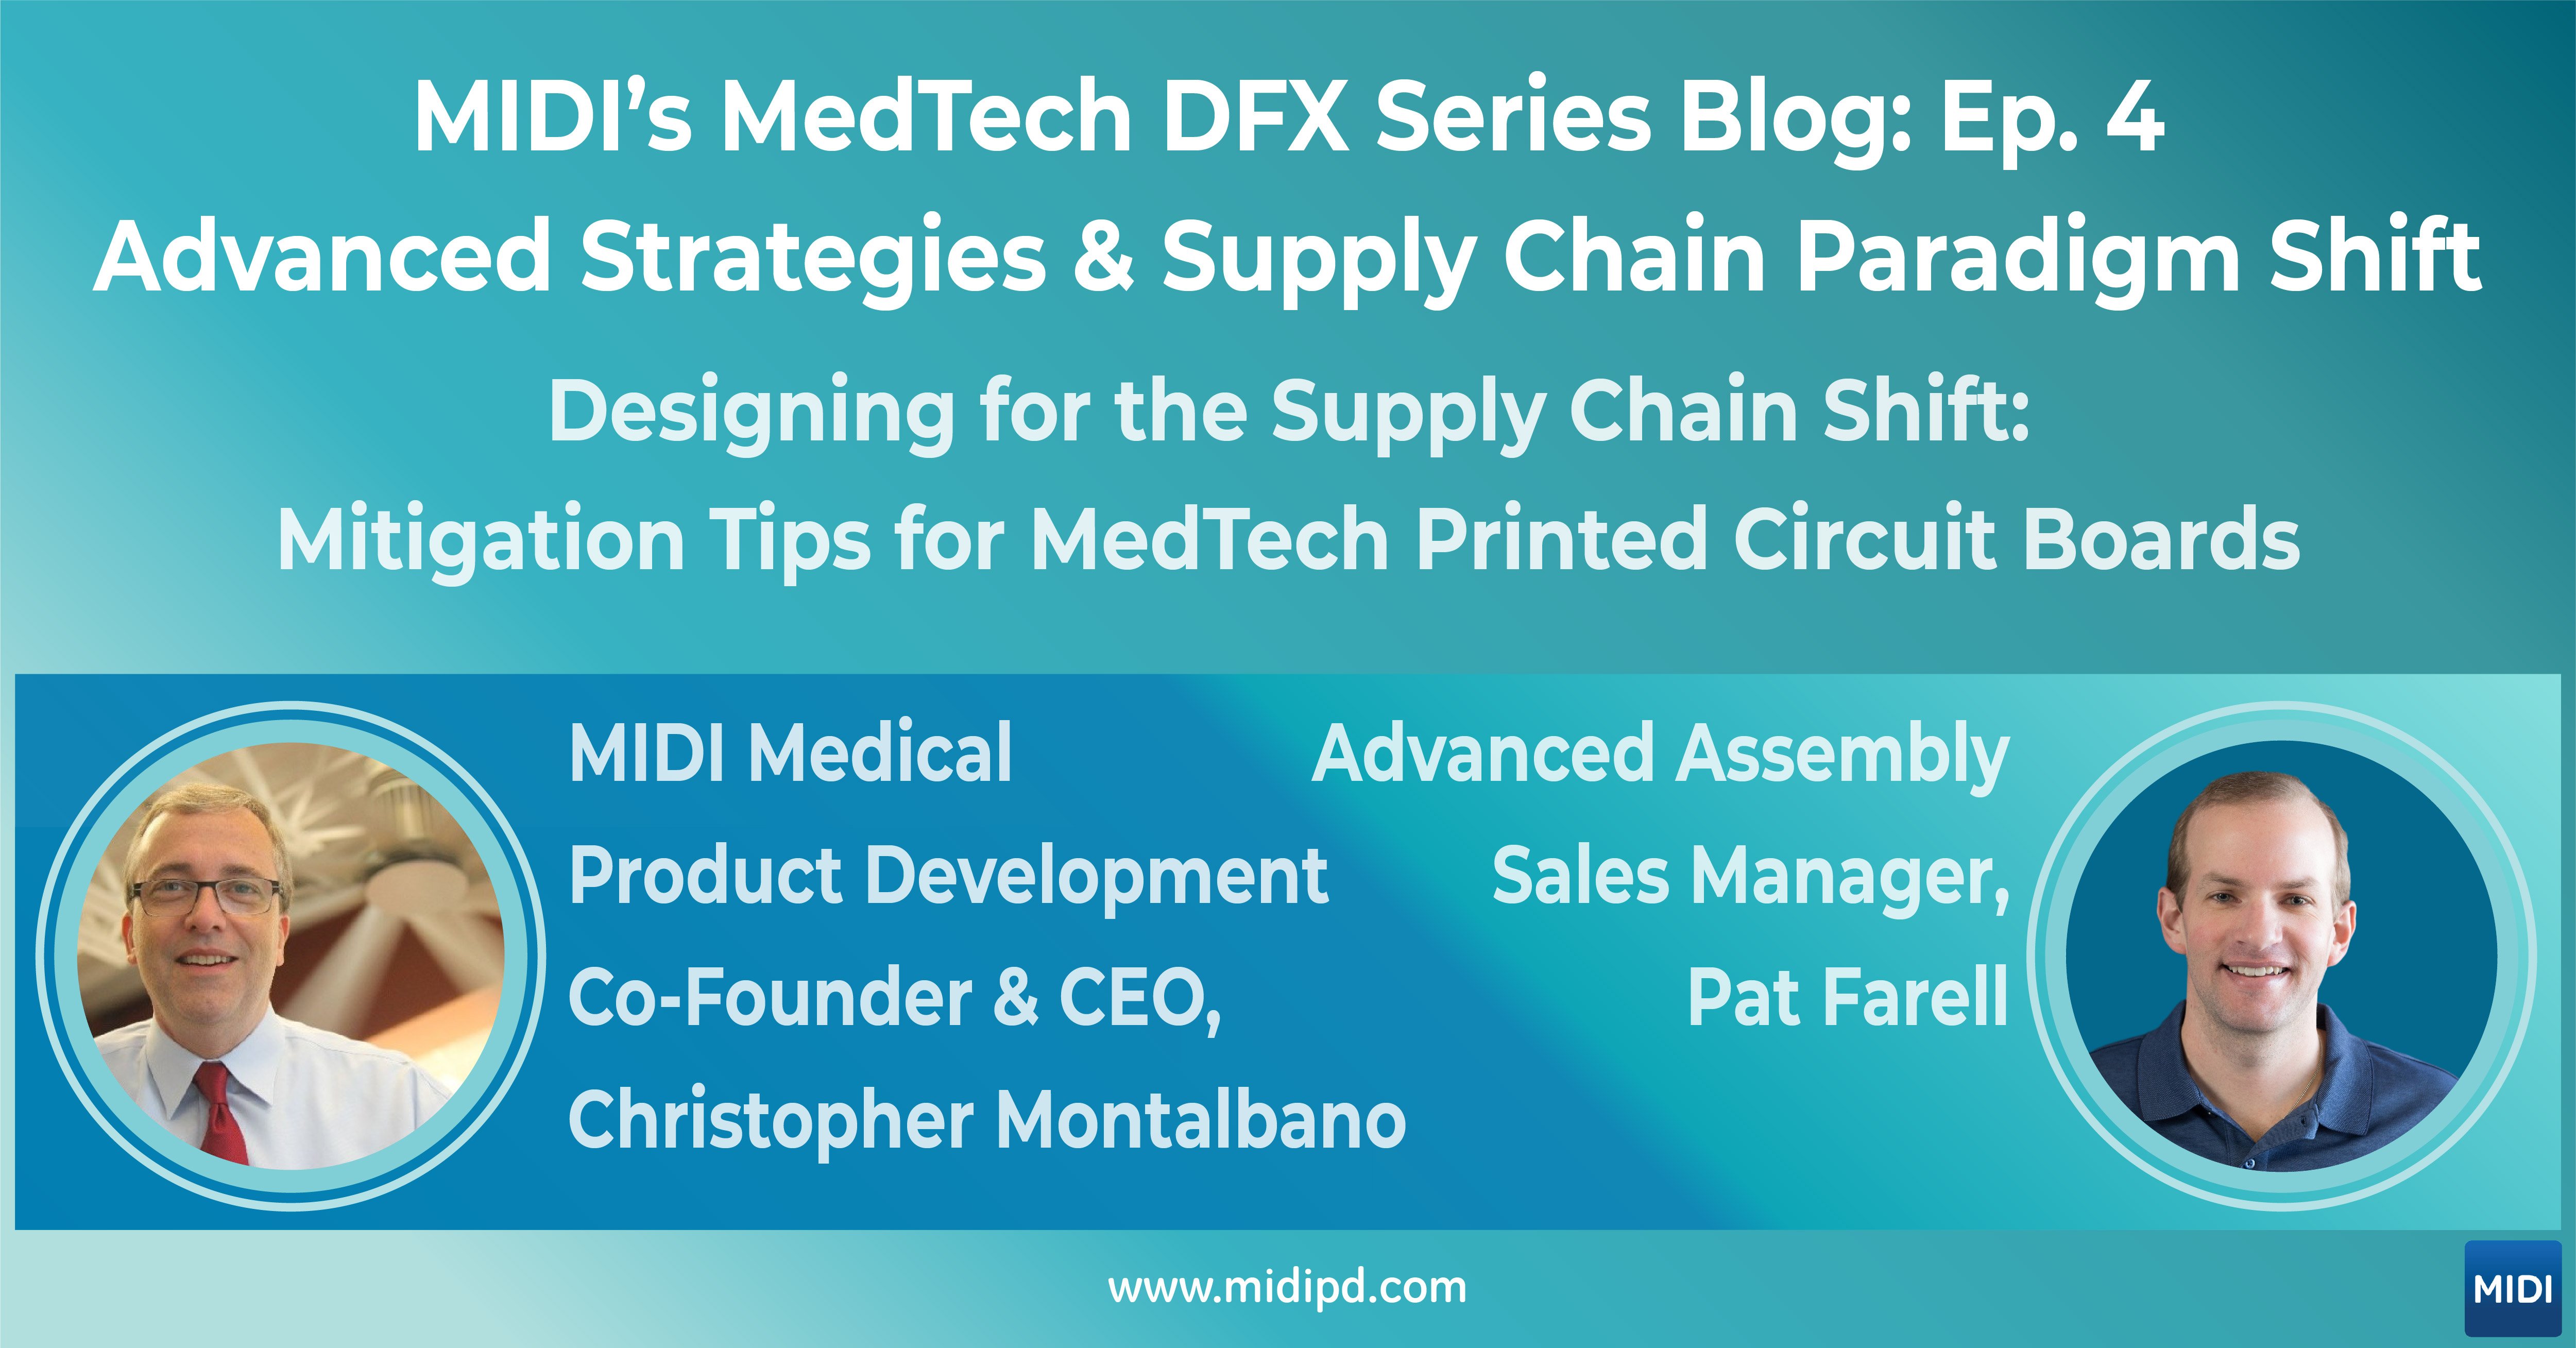 Designing for the Supply Chain Shift: Mitigation Tips for MedTech Printed Circuit Boards}